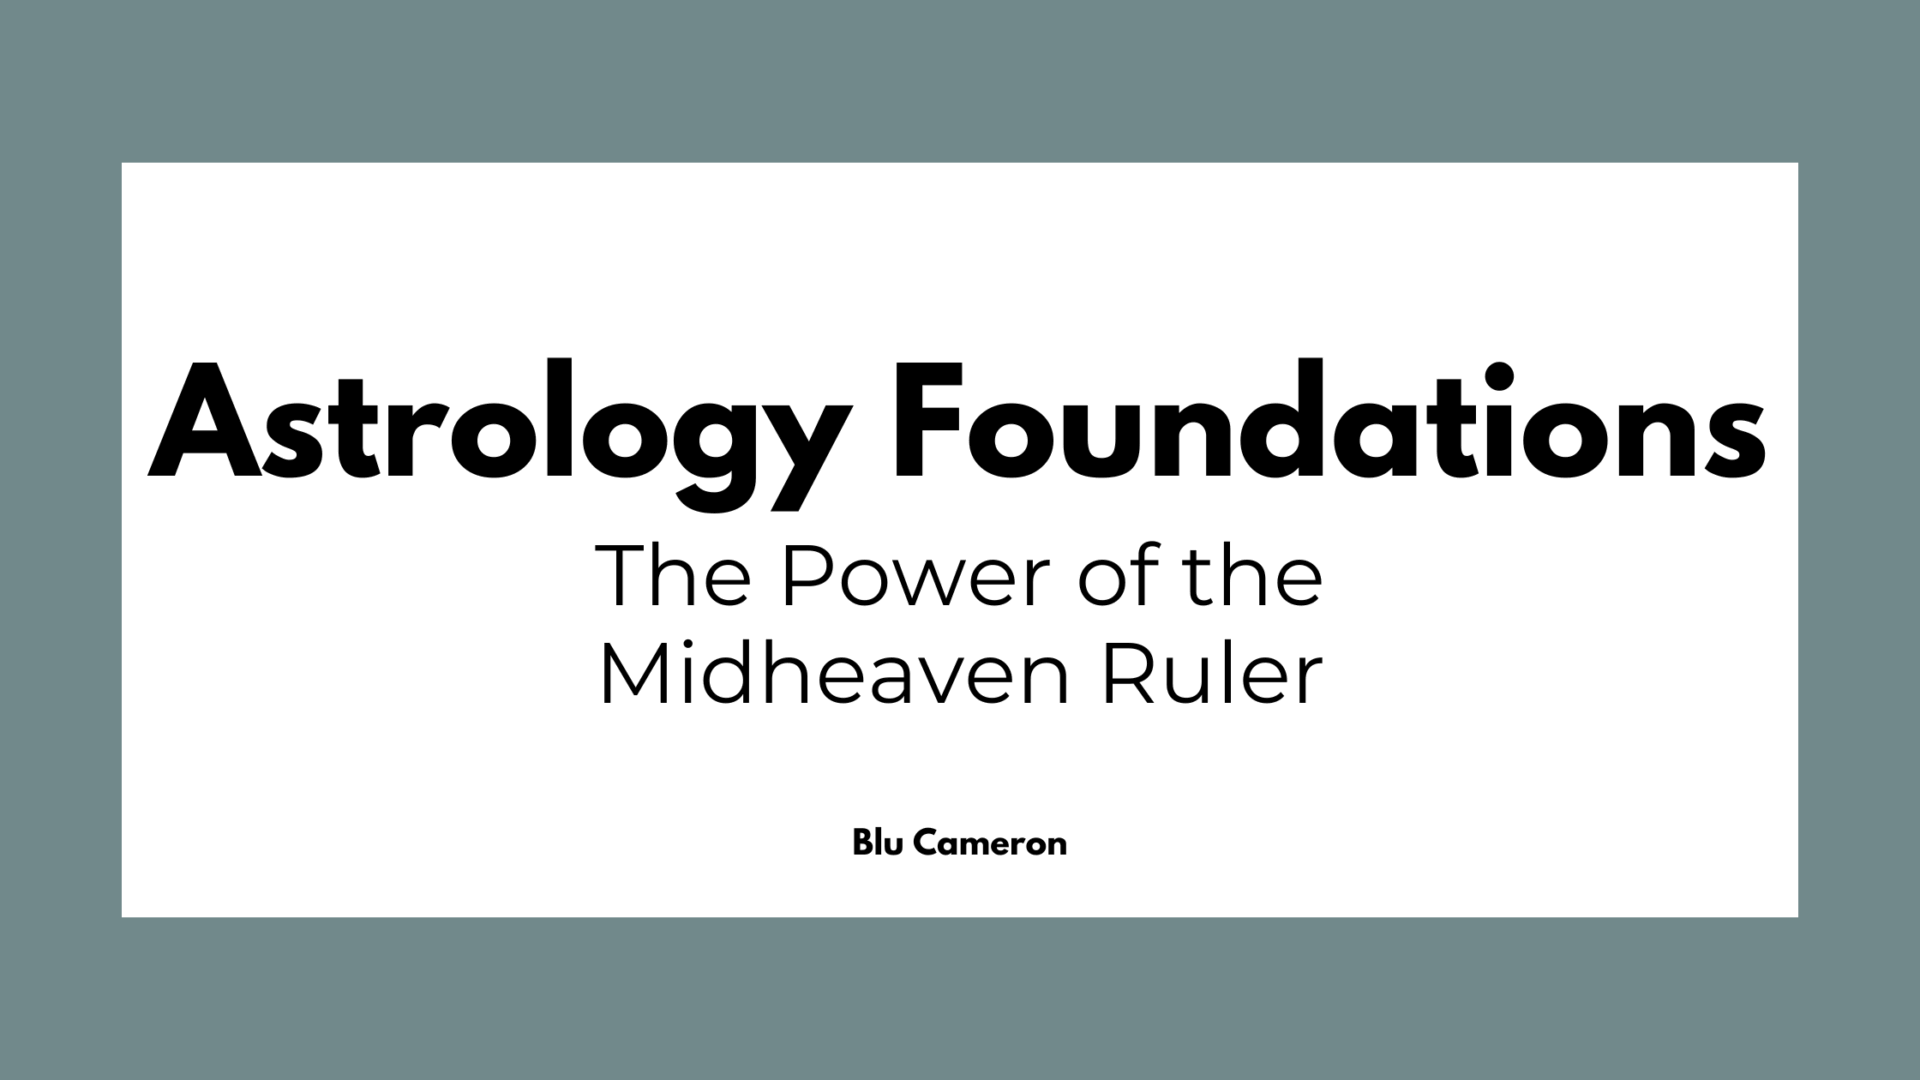 Black text against a white and greige background reads: "The Power of the Midheaven Ruler"